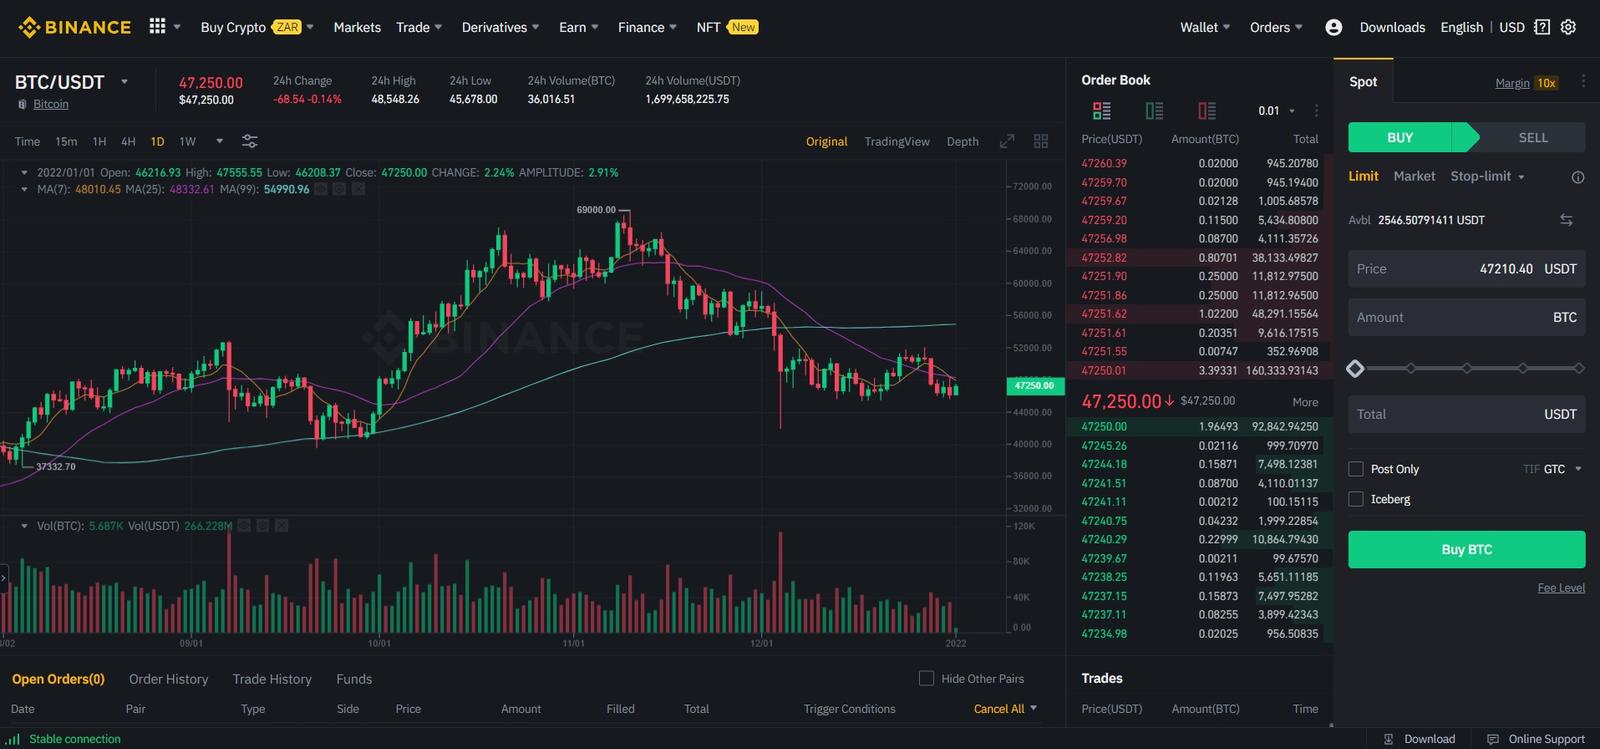 Binance user interface for charting and trading